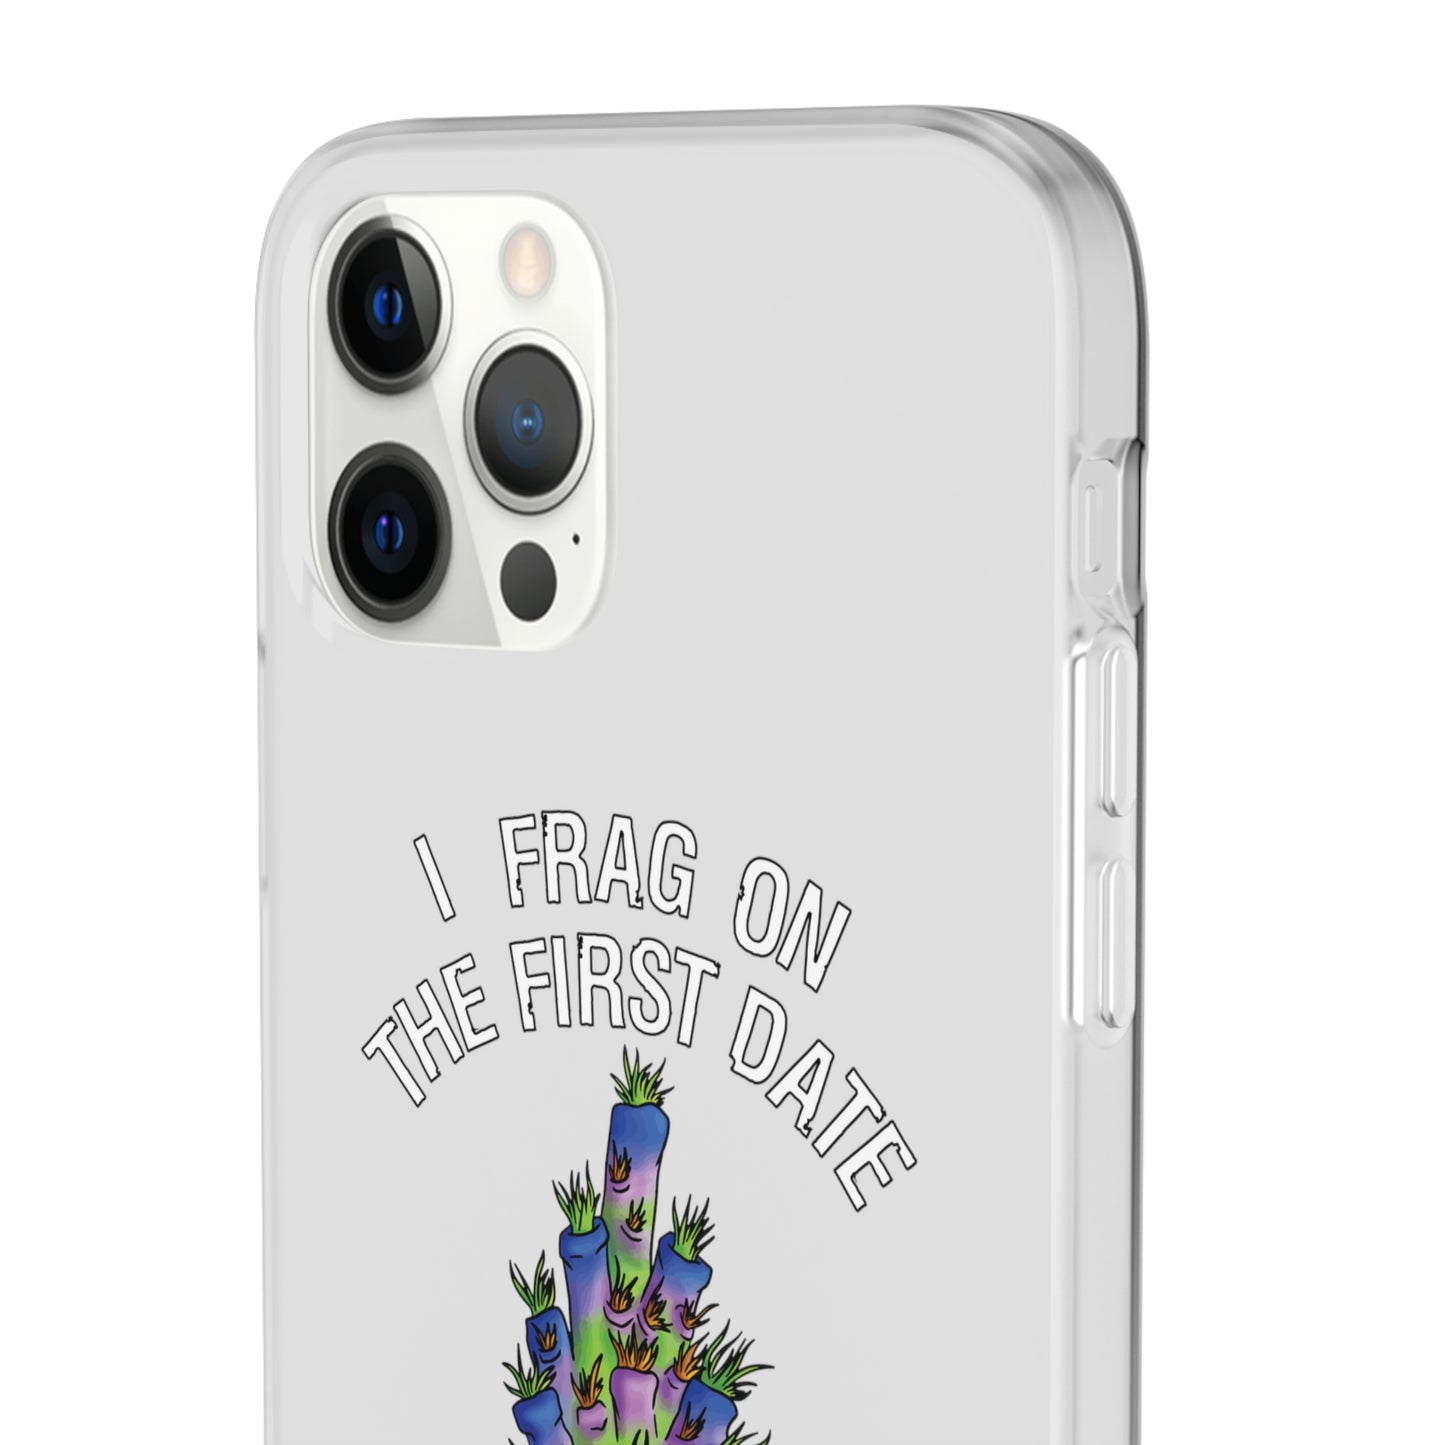 "I Frag On The First Date" Acropora Frag Cell Phone Flexi Case